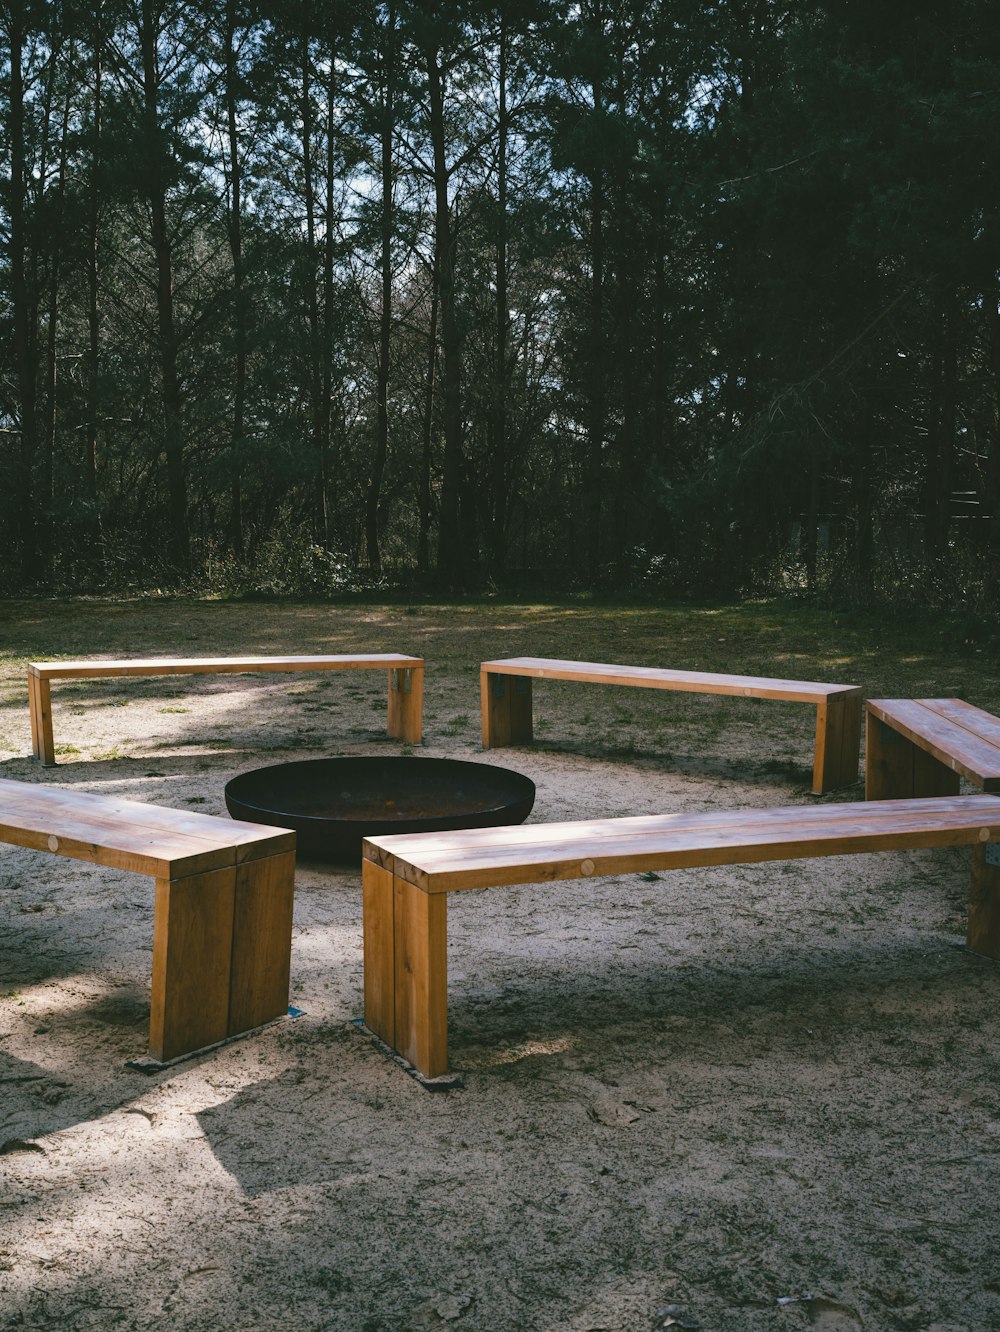 a group of wooden benches sitting next to a fire pit